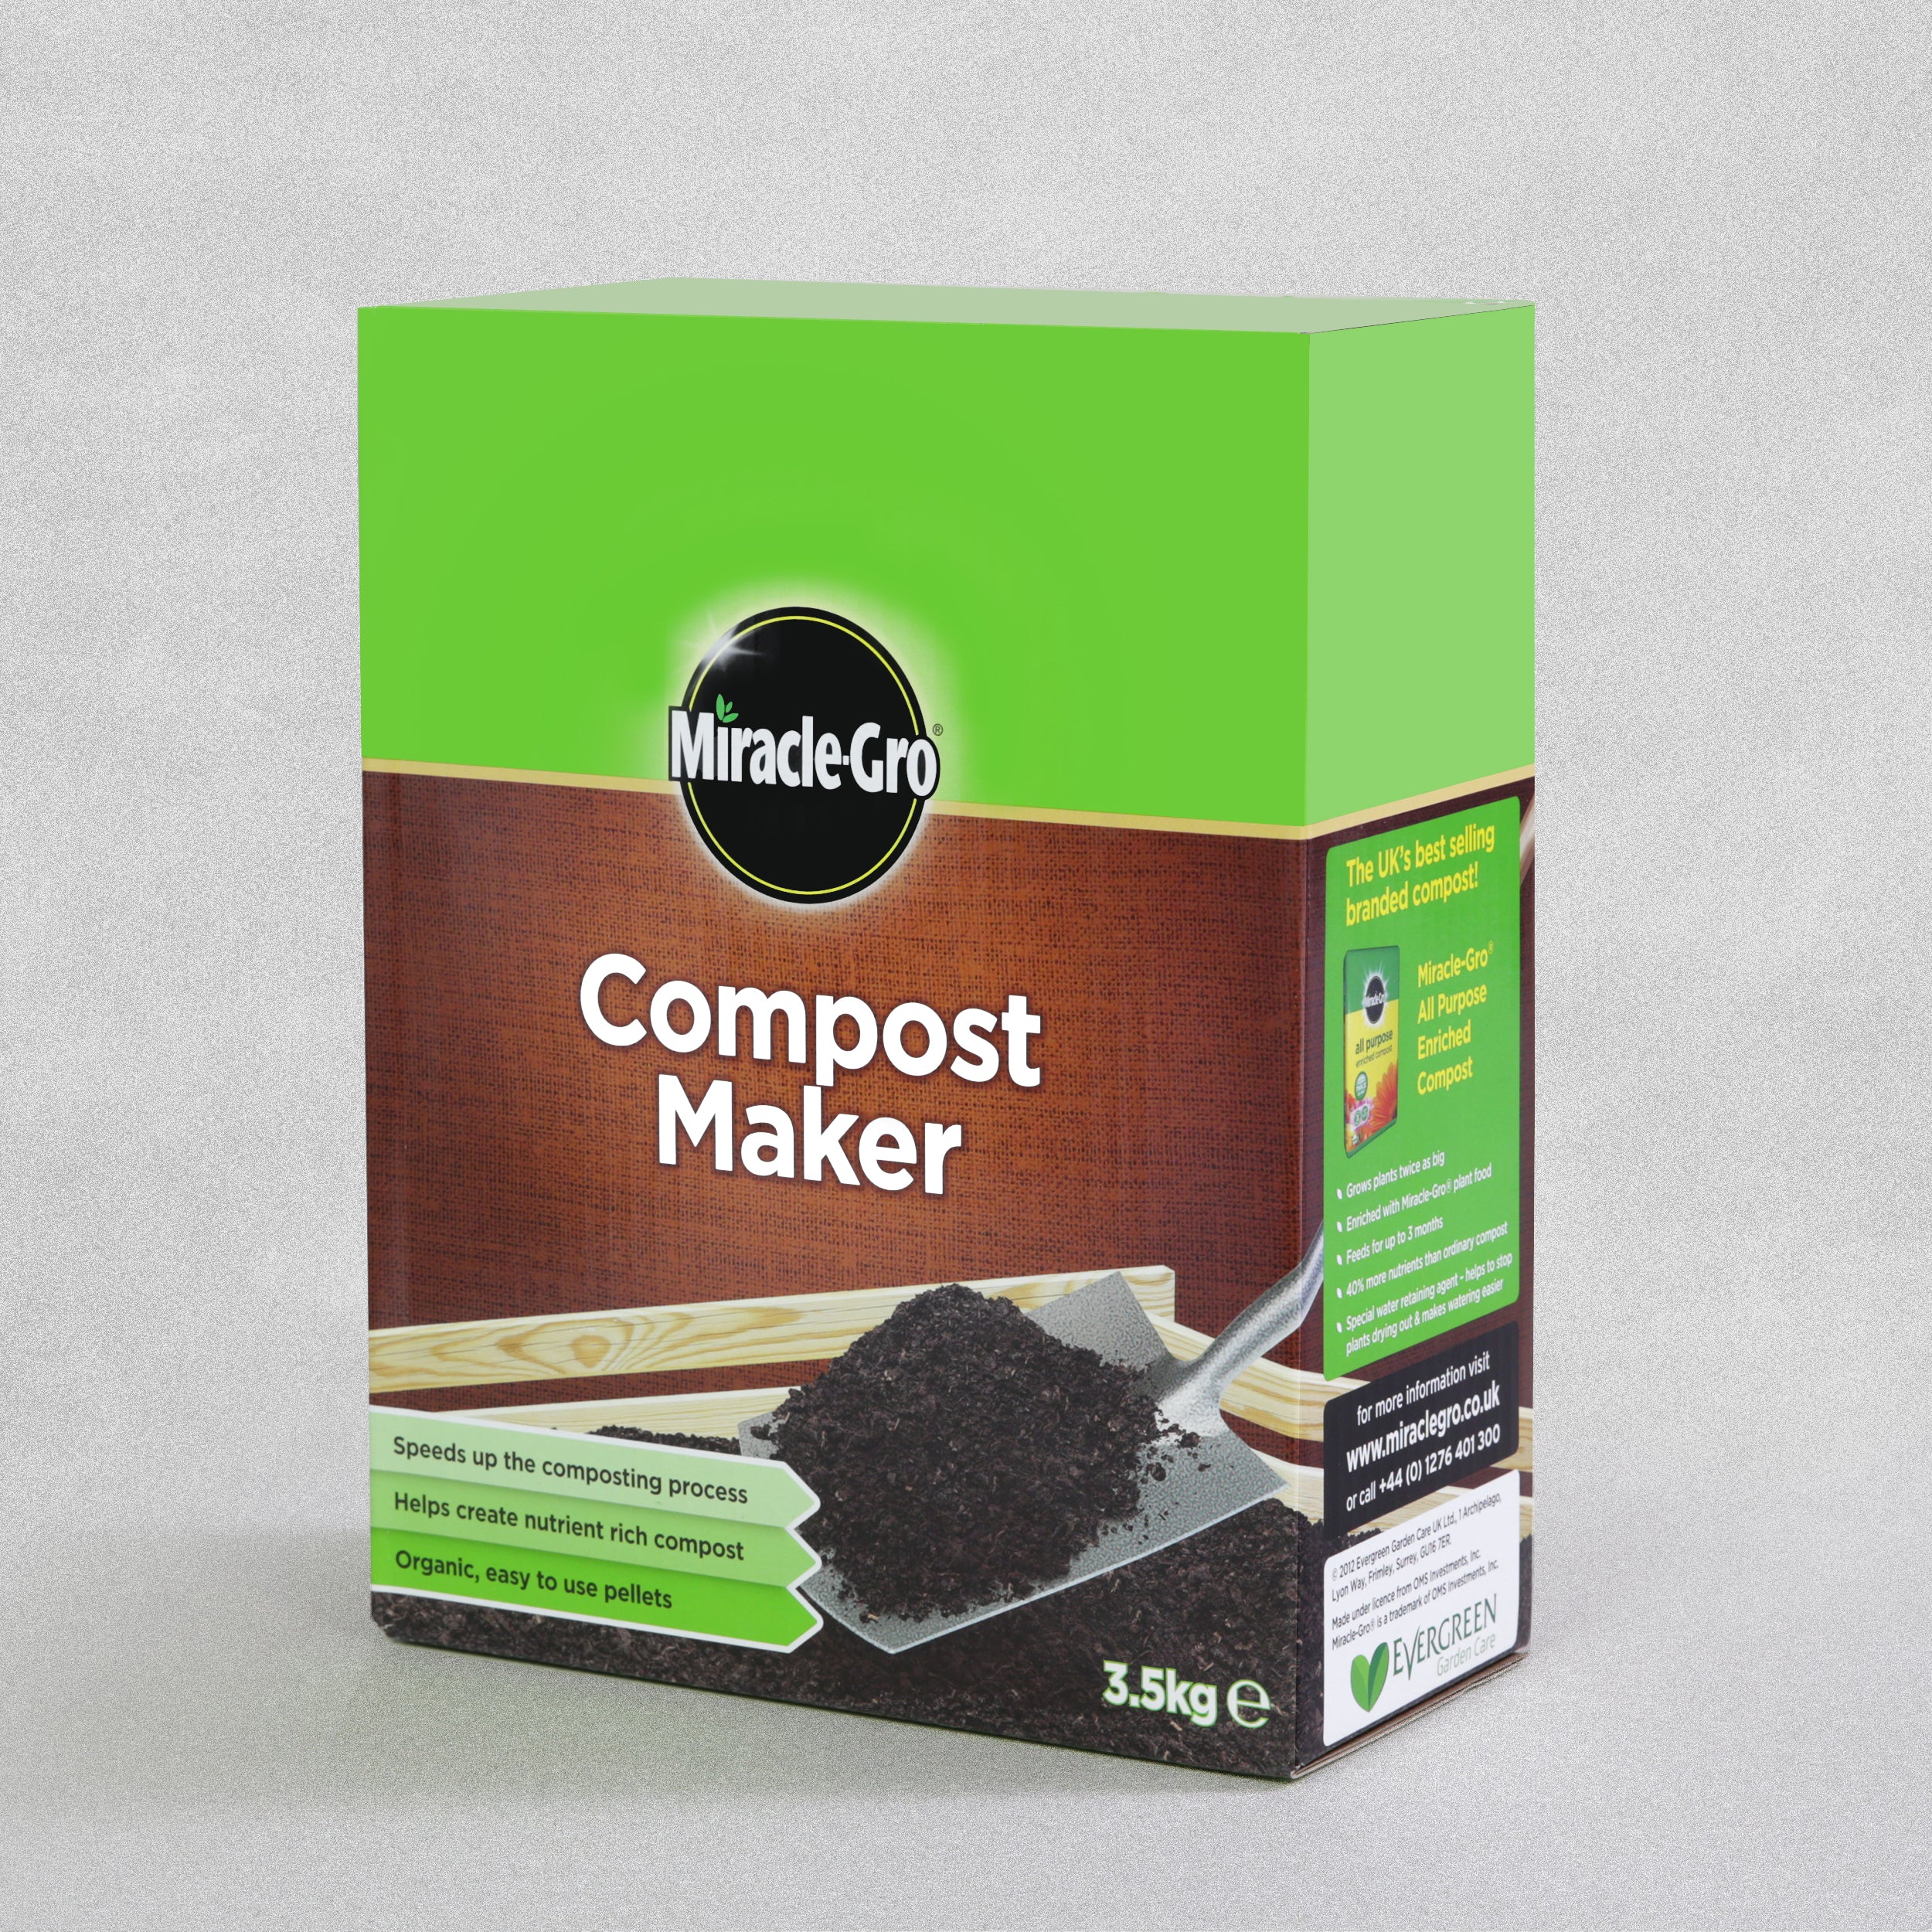 Miracle-Gro Compost Maker 3.5kg